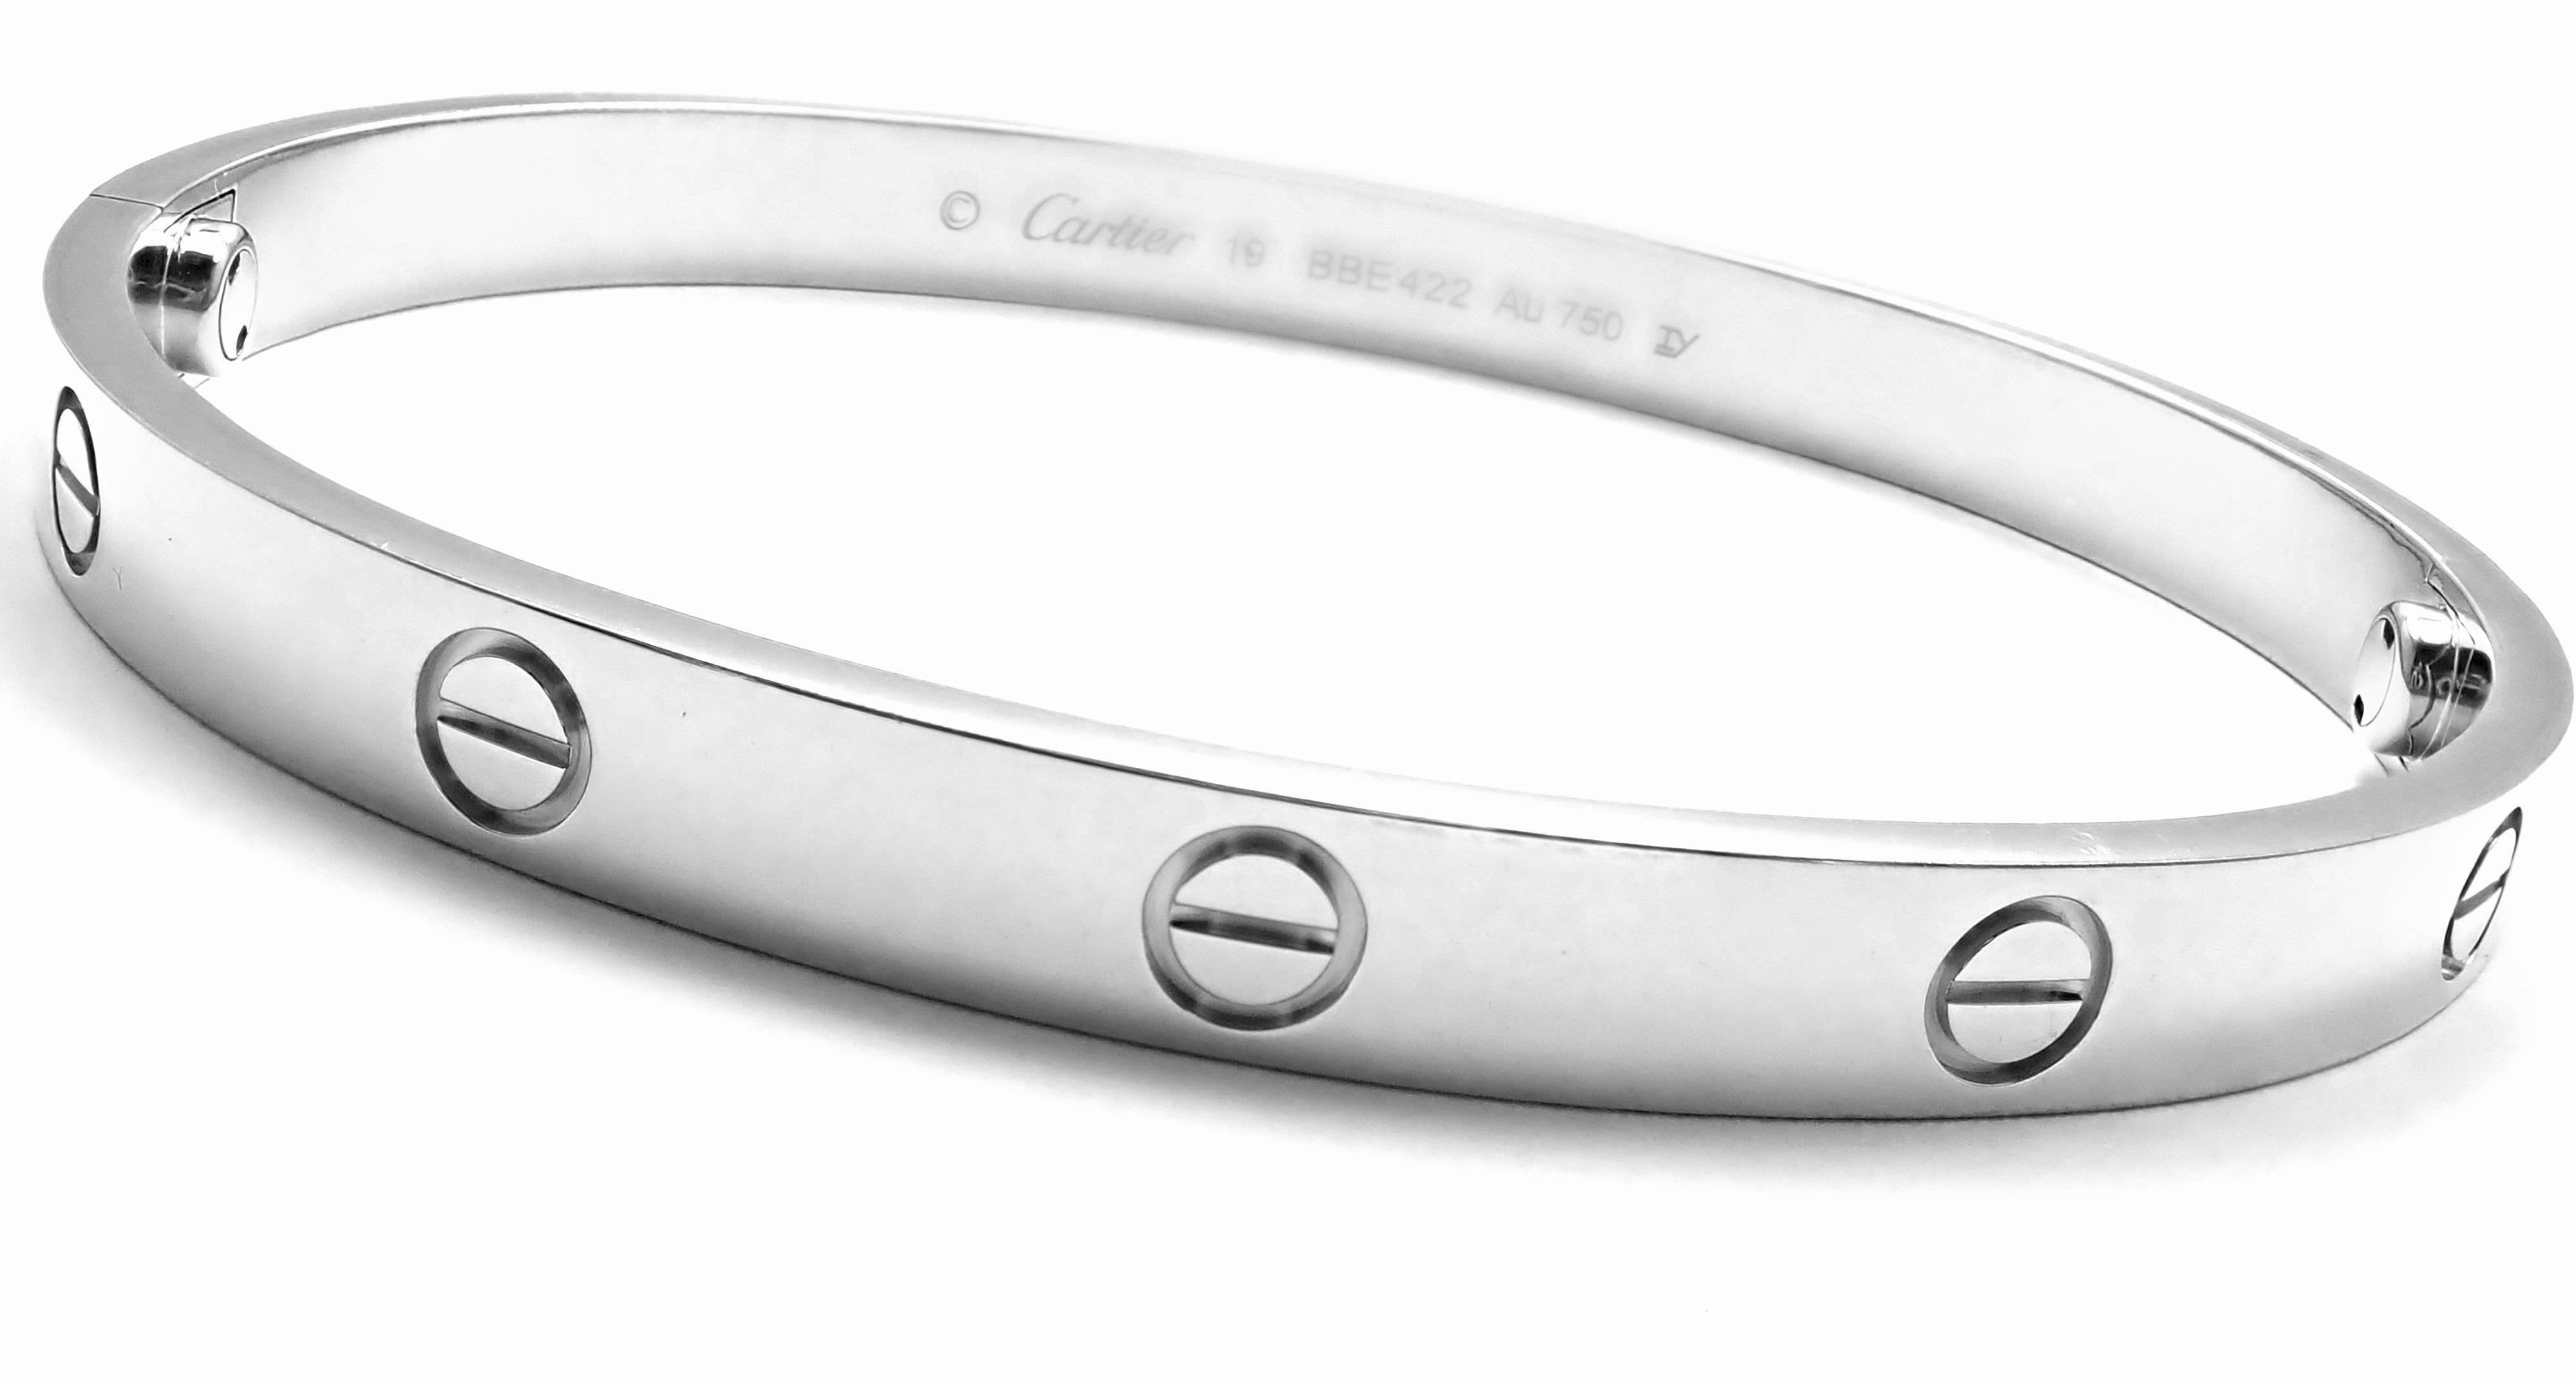 18k White Gold Love Bangle Bracelet by Cartier. Size 19. 
This bracelet comes with Cartier certificate, Cartier box and Cartier screwdriver.
This bracelet has the new screw system.
Details: Size: 19 
Weight: 38.1 grams
Width: 6.5mm 
Hallmarks: